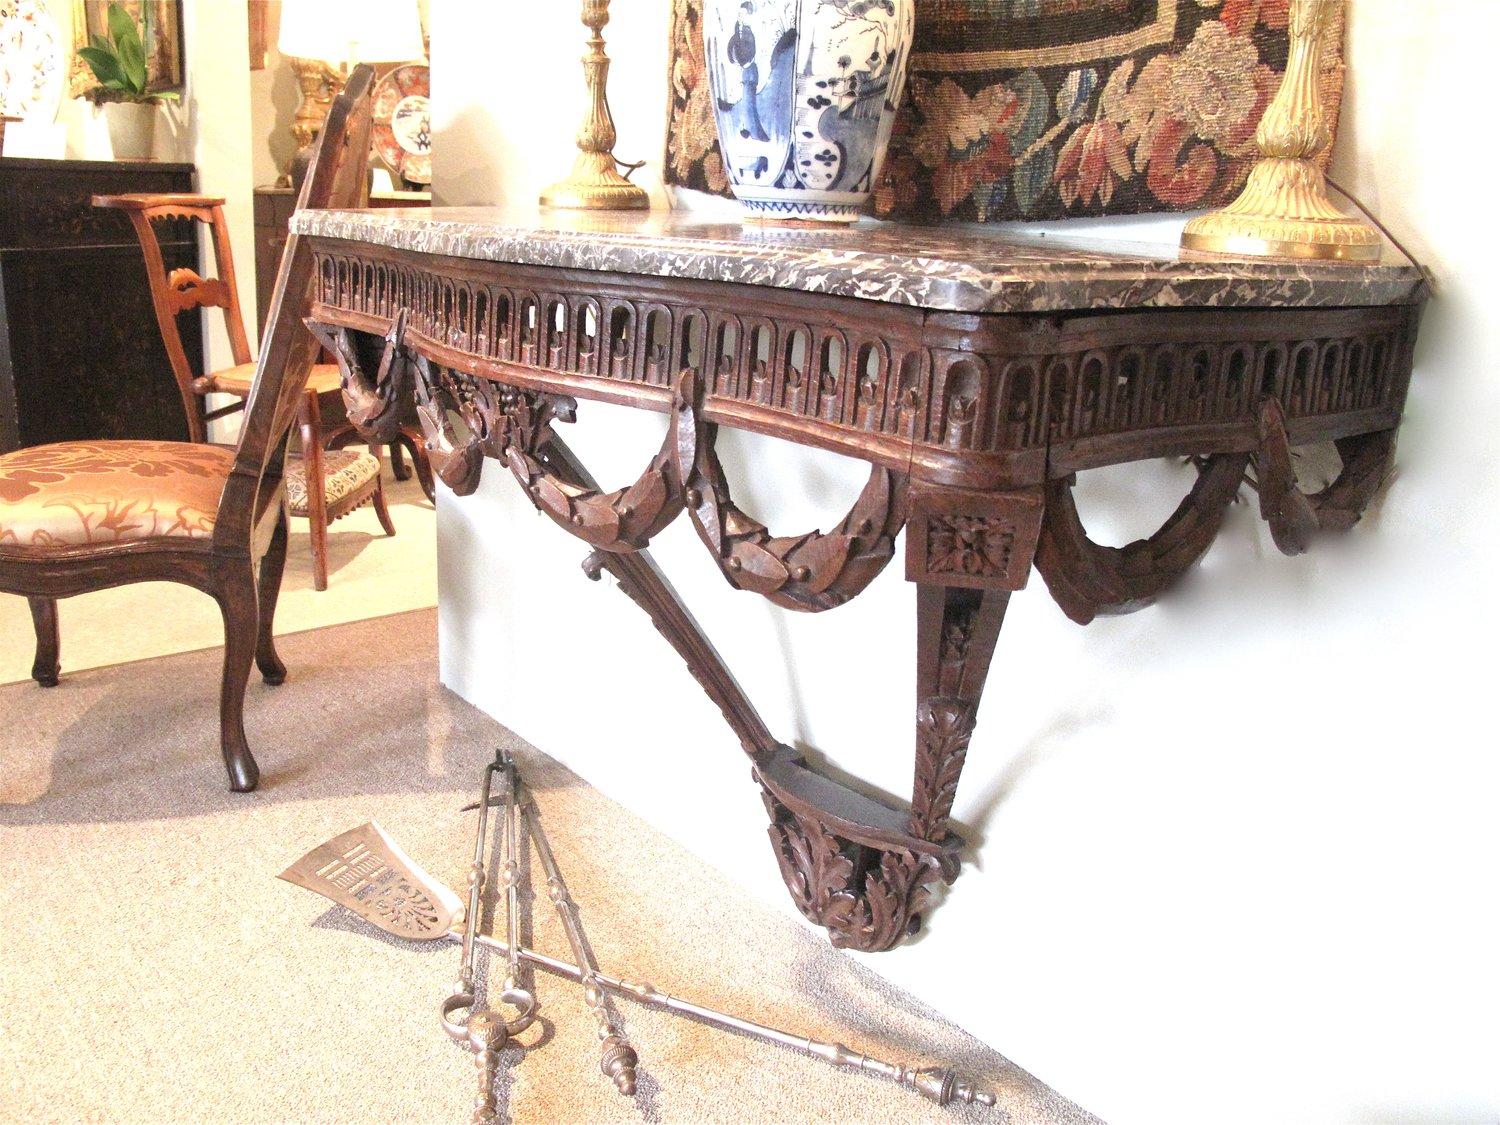 Louis XVI Period Marble Topped French Neoclassical Console Table, 18th Century For Sale 2